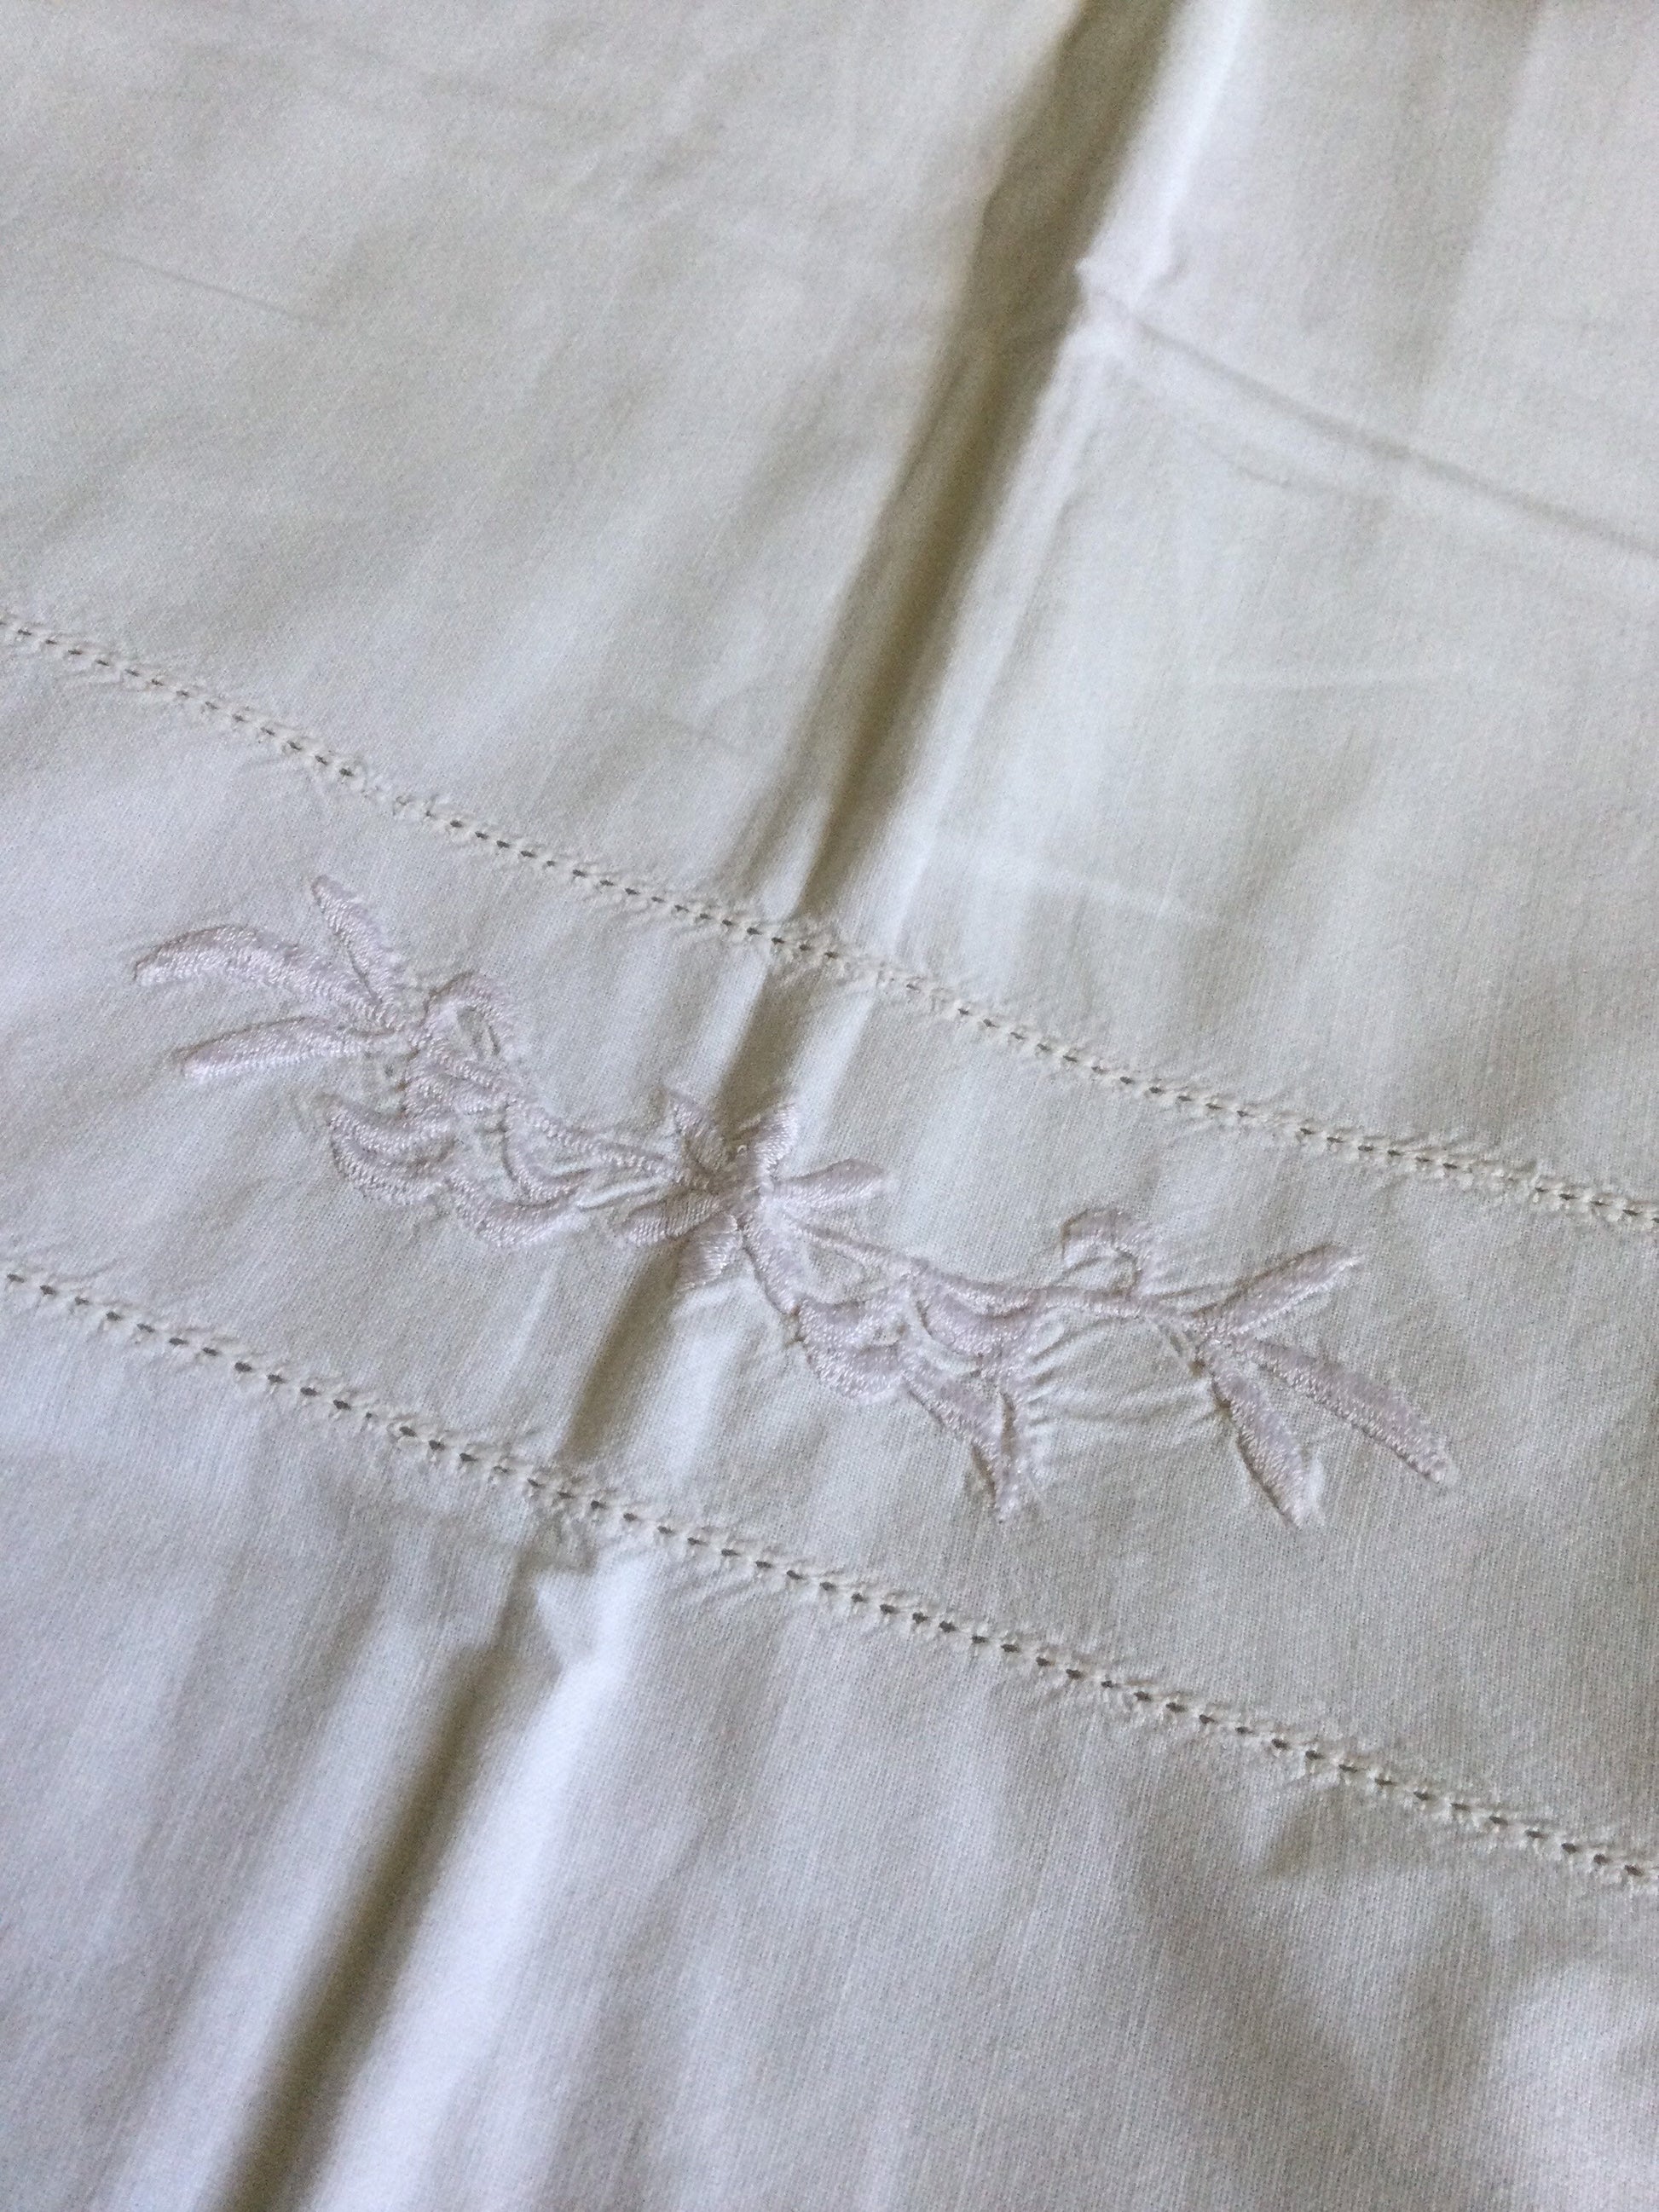 large square pillowcase cover single tie ends embroidered white cotton floral